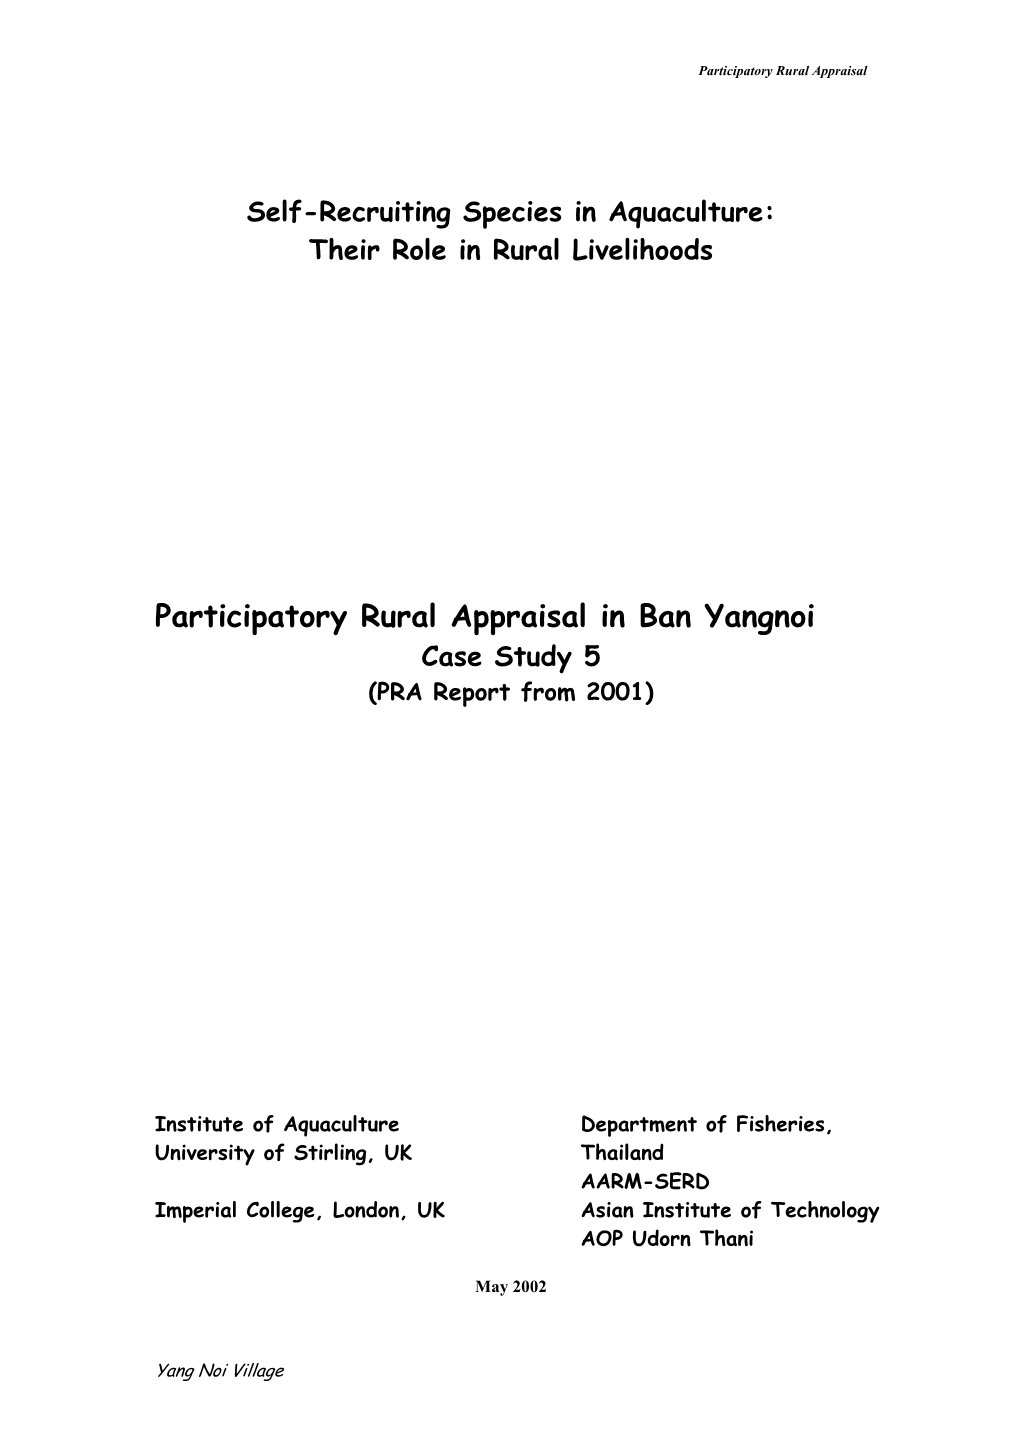 Participatory Rural Appraisal in Ban Yangnoi Case Study 5 (PRA Report from 2001)